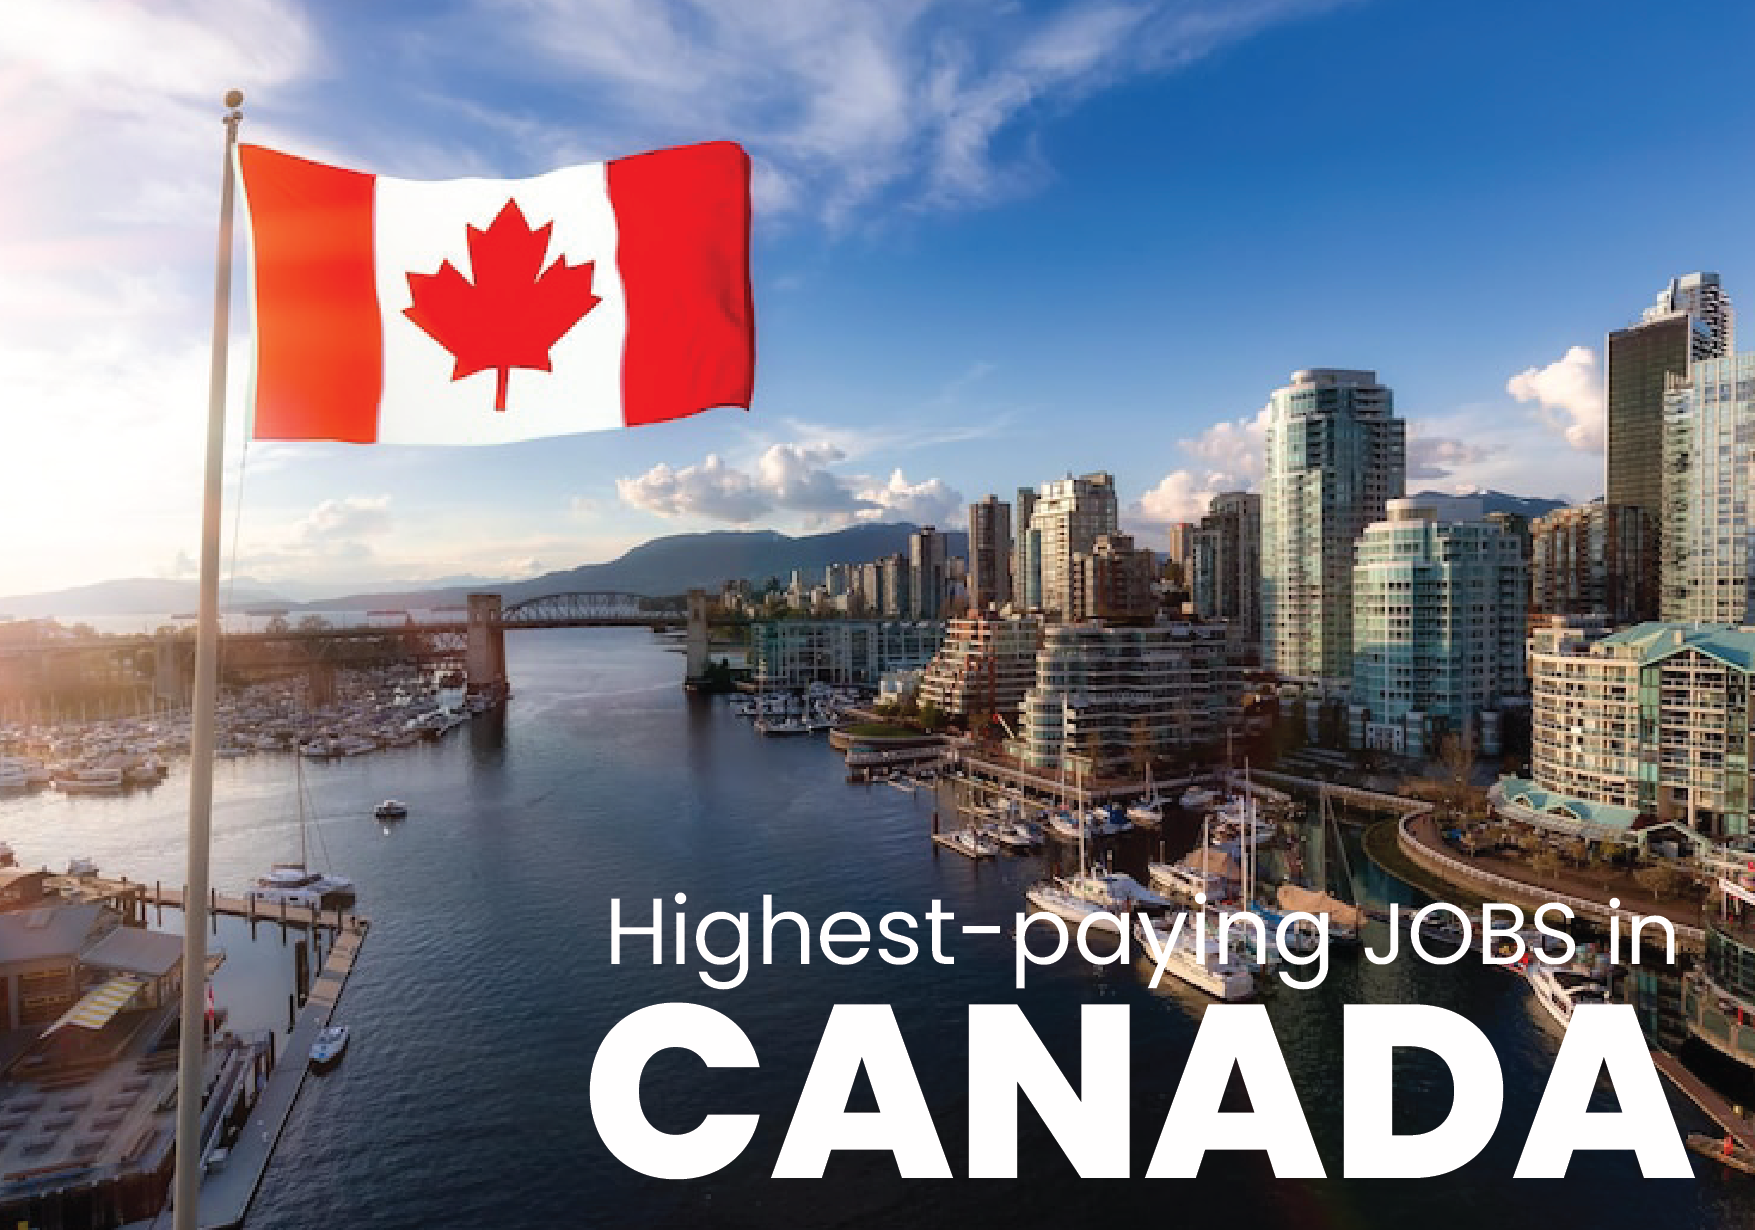 The Highest-paying jobs in Canada.